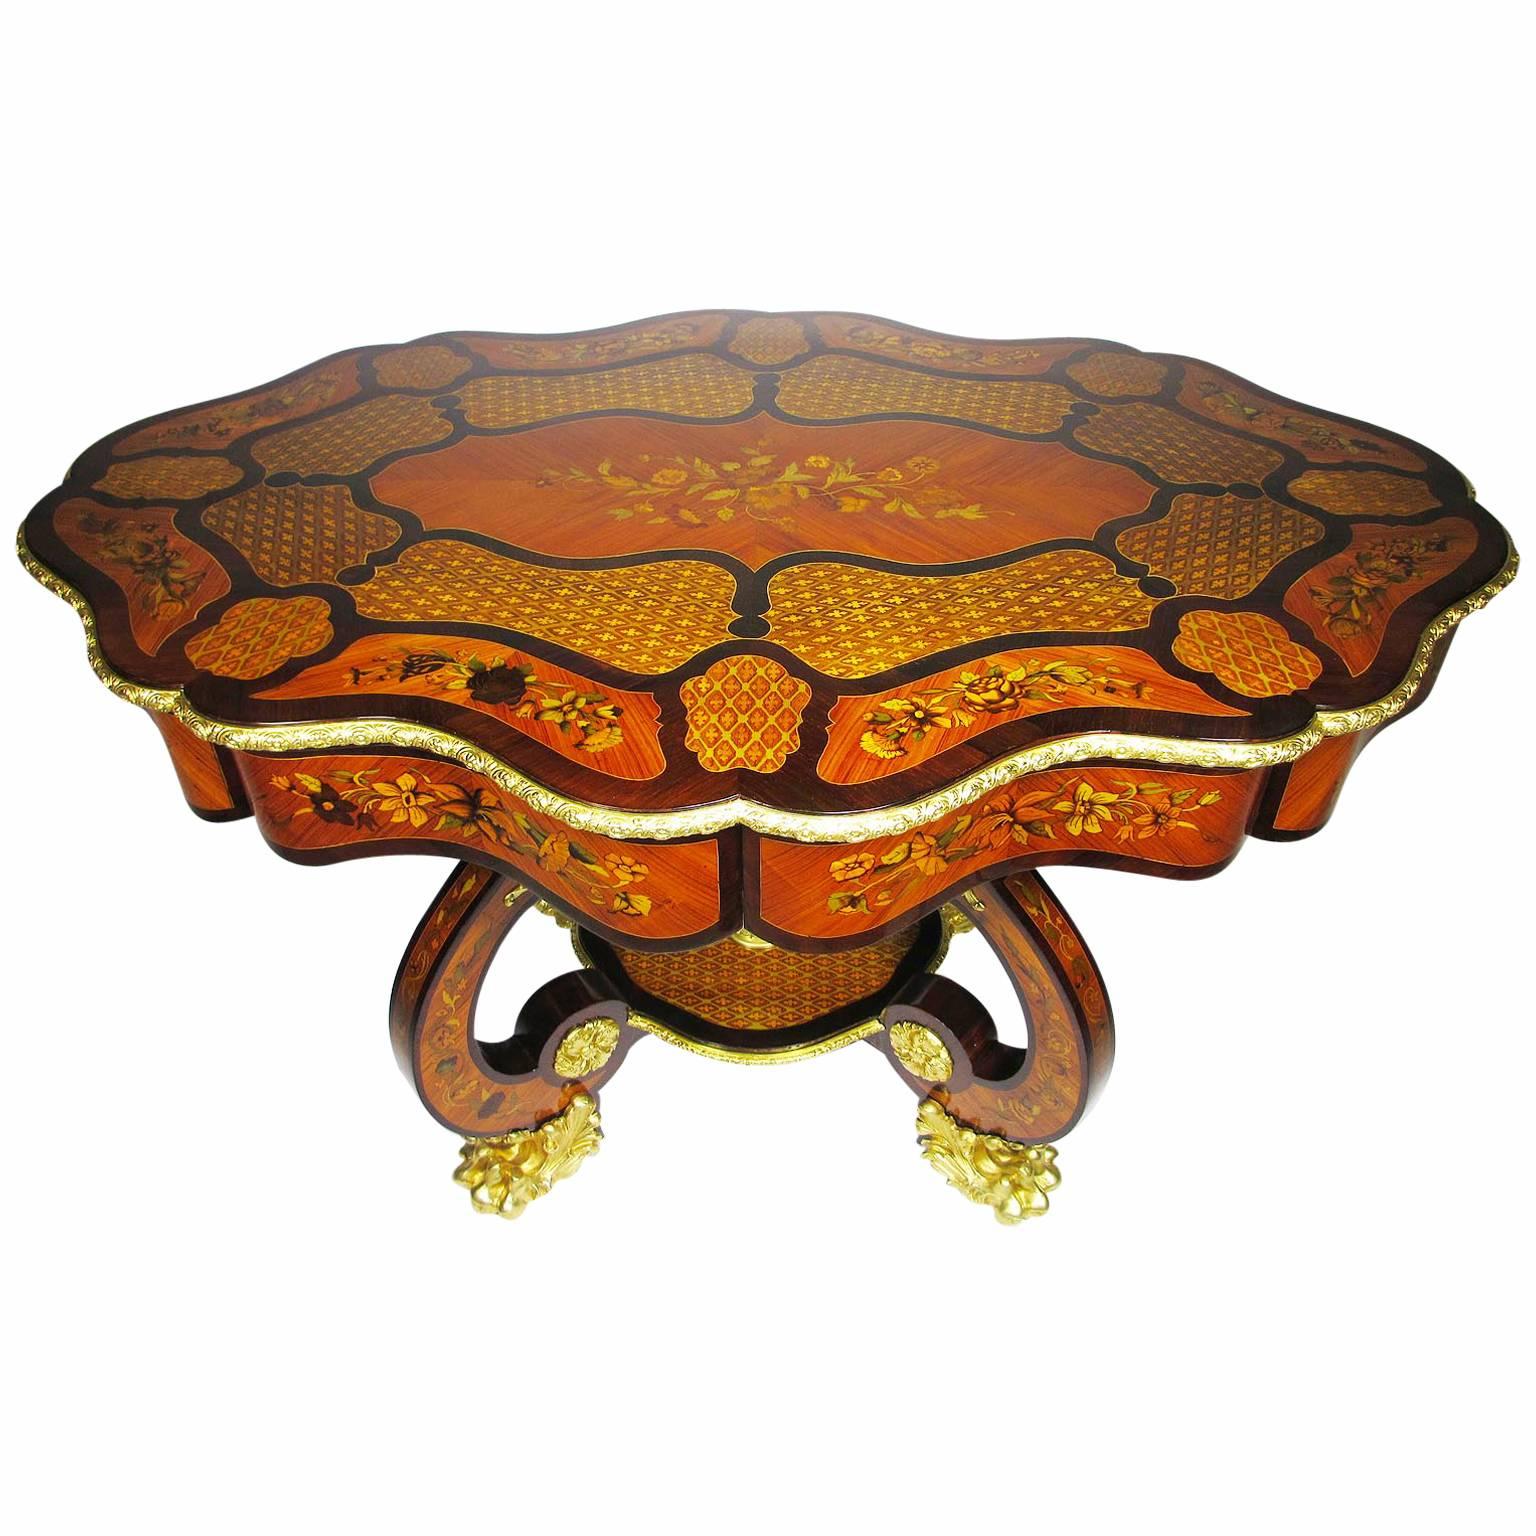 Fine Italian 19th Century Floral Marquetry Gilt Bronze-Mounted Center Table Desk For Sale